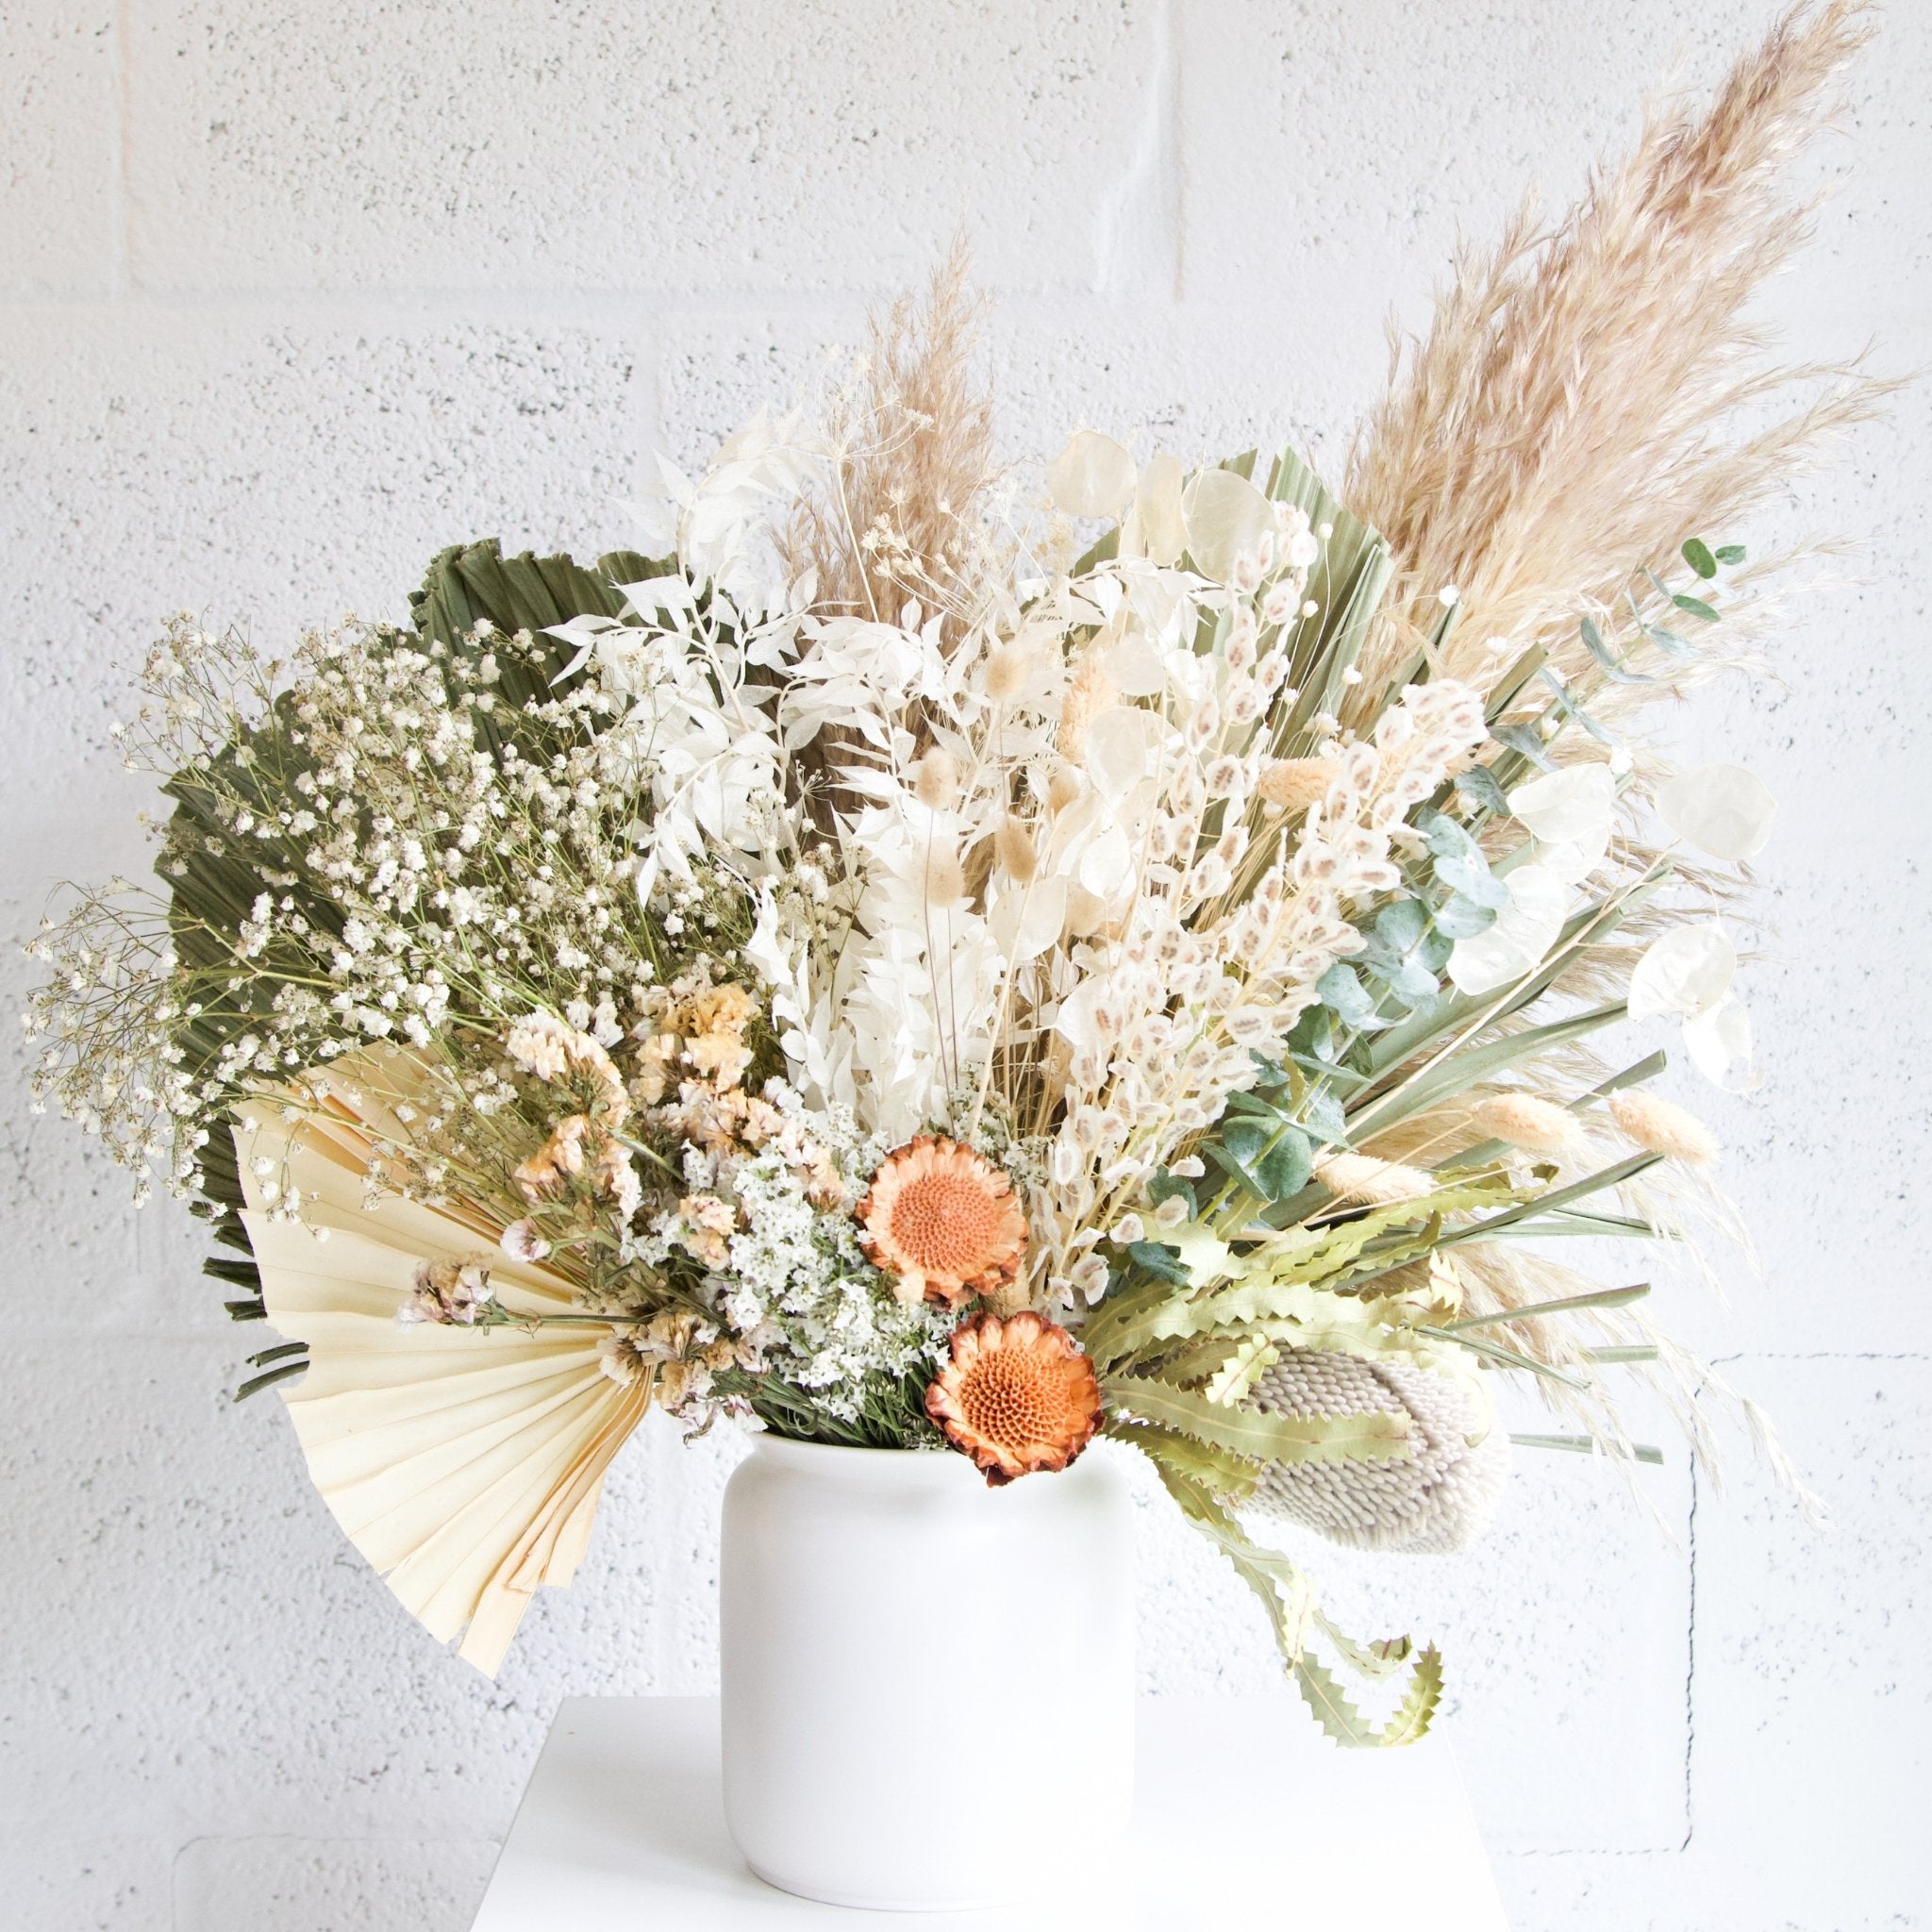 Shop Dried Flowers Online at